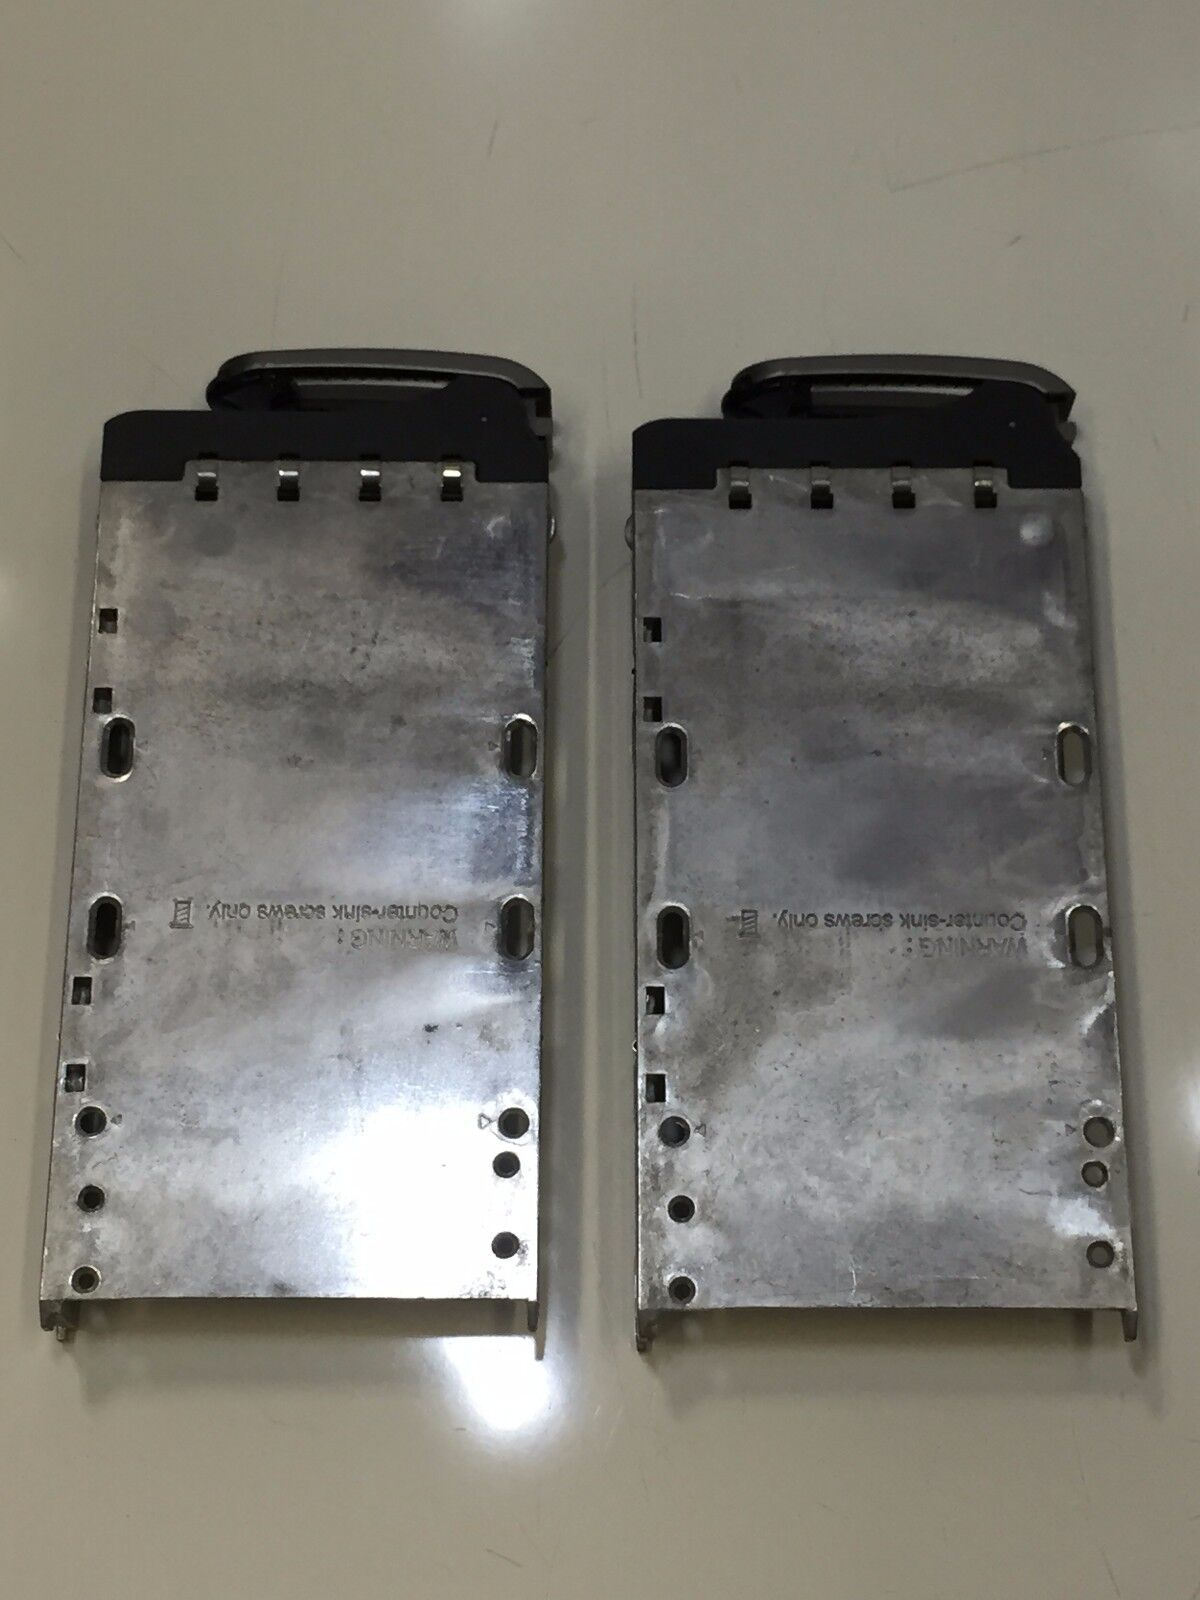 Promise 3.5" Hard Drive Tray for VTRAK M500p M500i 15100 15200 Caddy, Lot of (2)